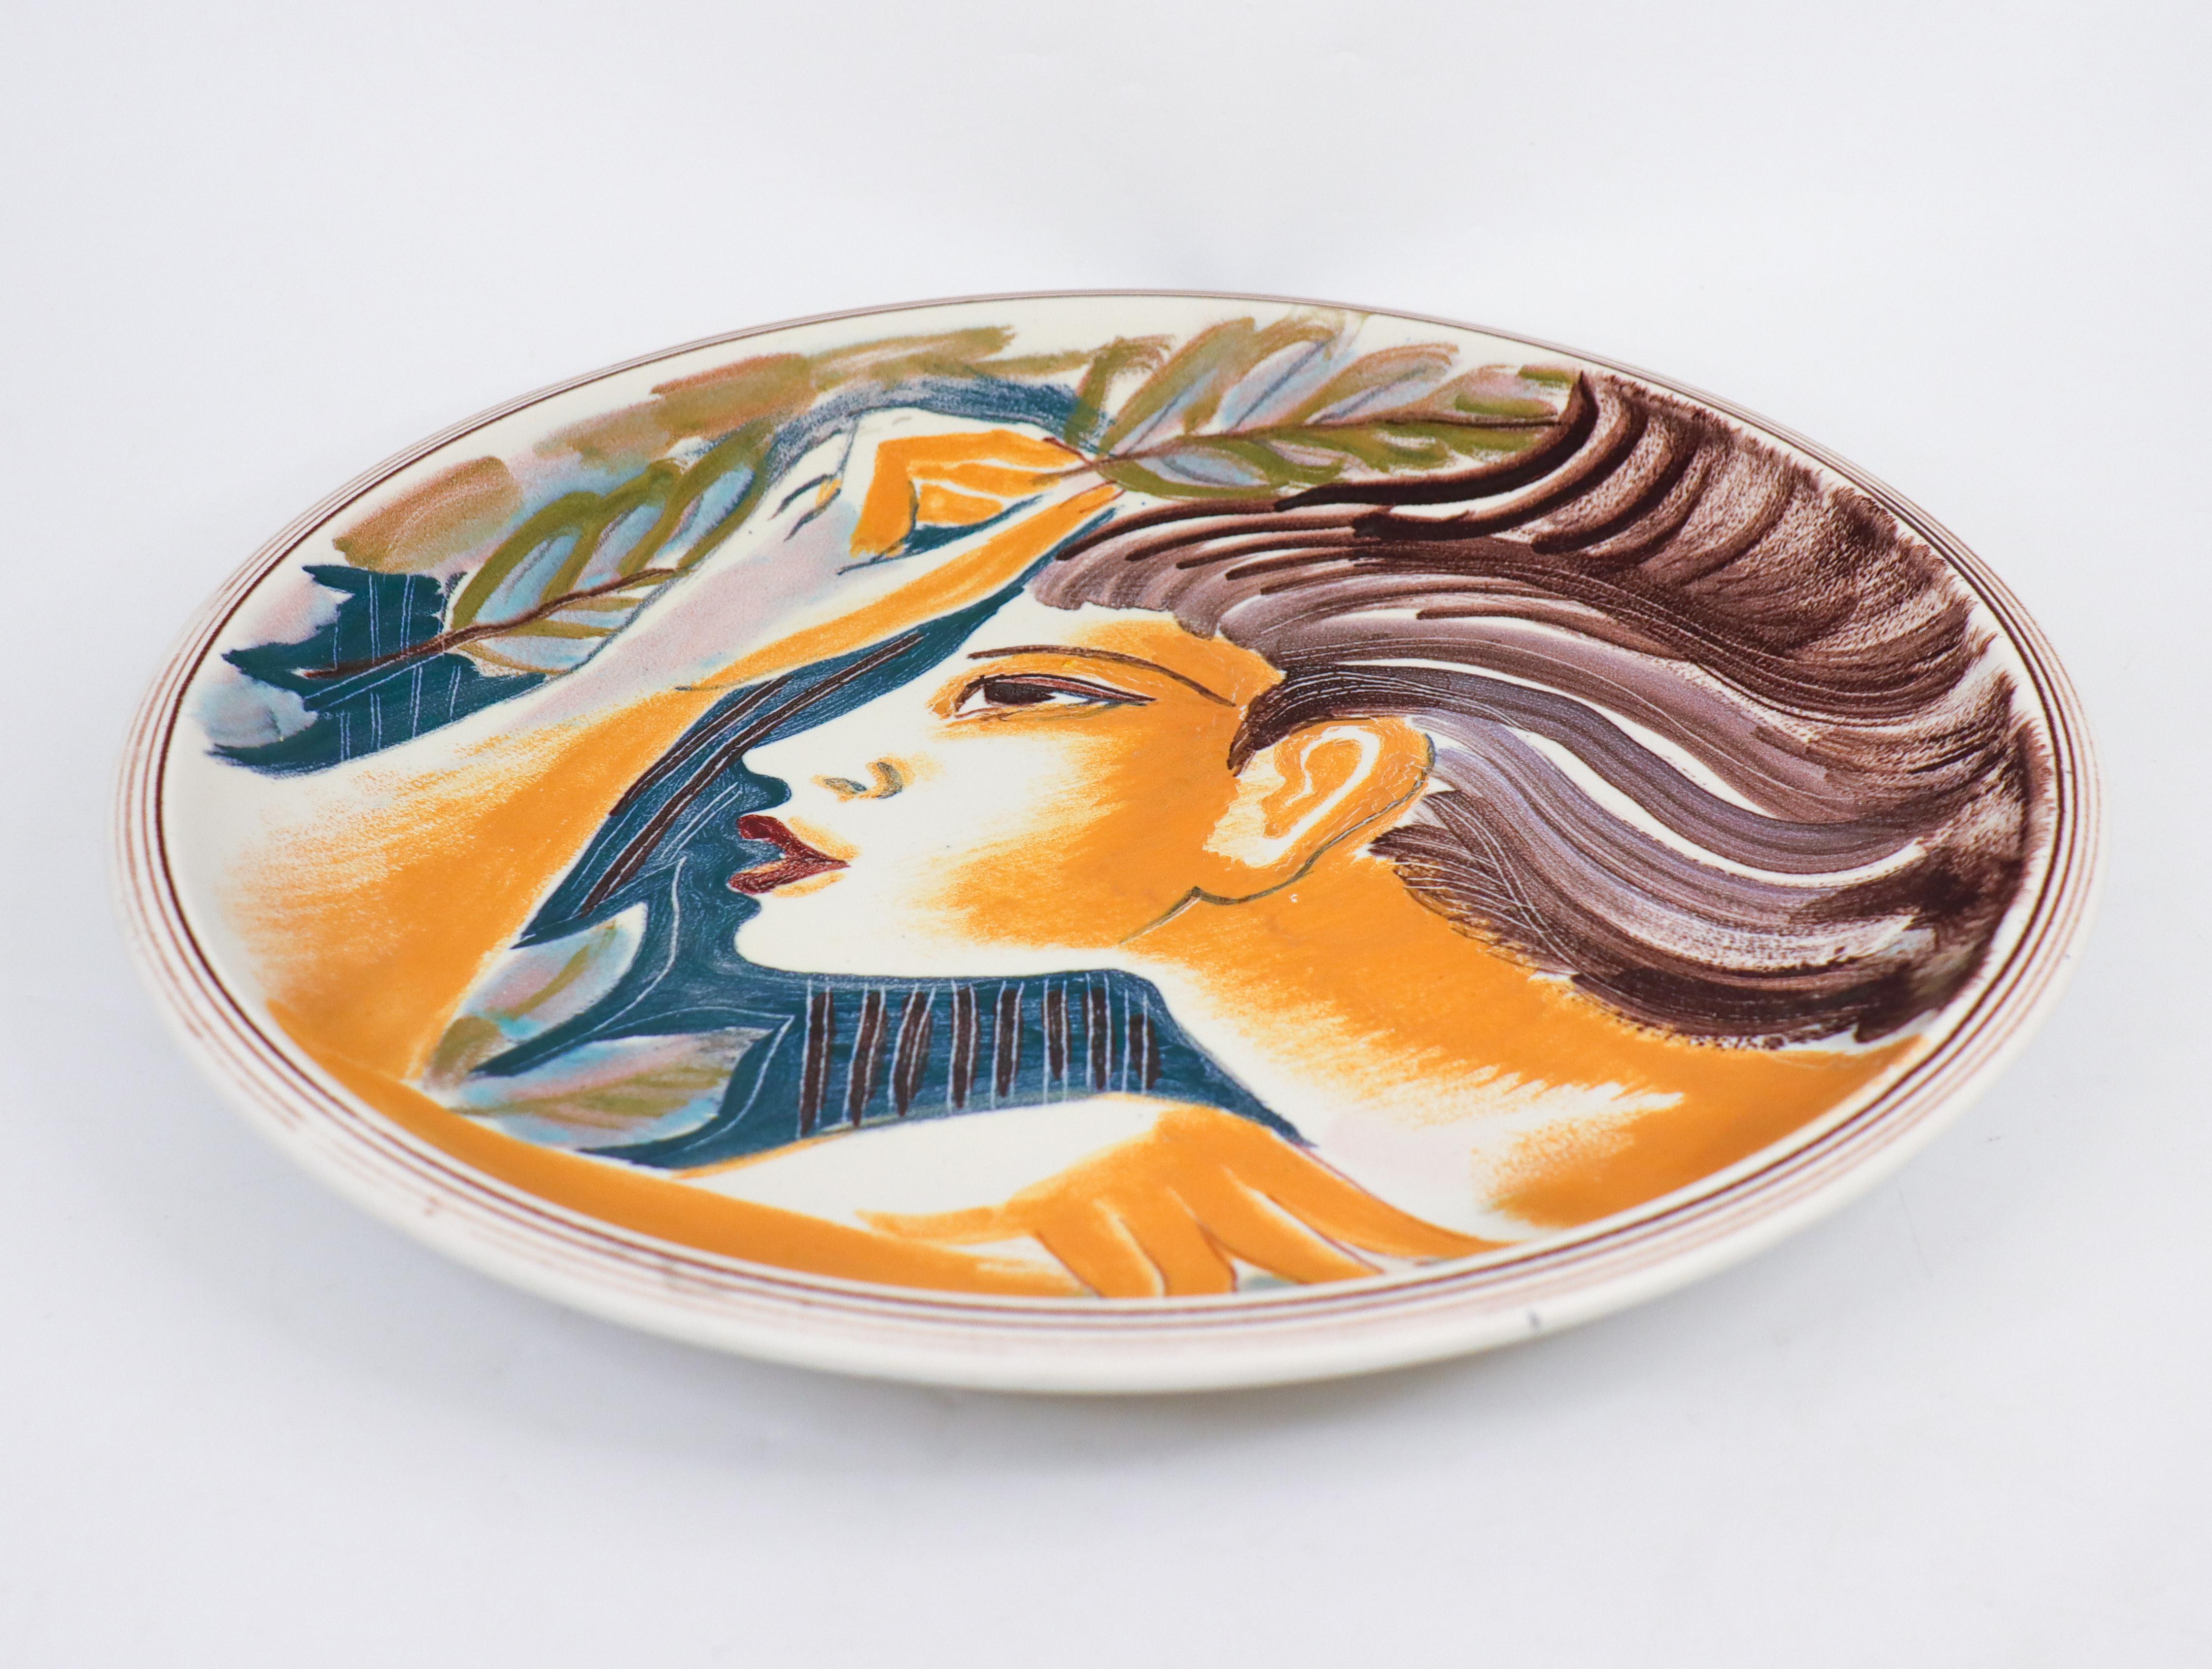 A unique hand painted bowl designed by Carl-Harry Stålhane at Rörstrand in 1943, it is 37,5 cm (15